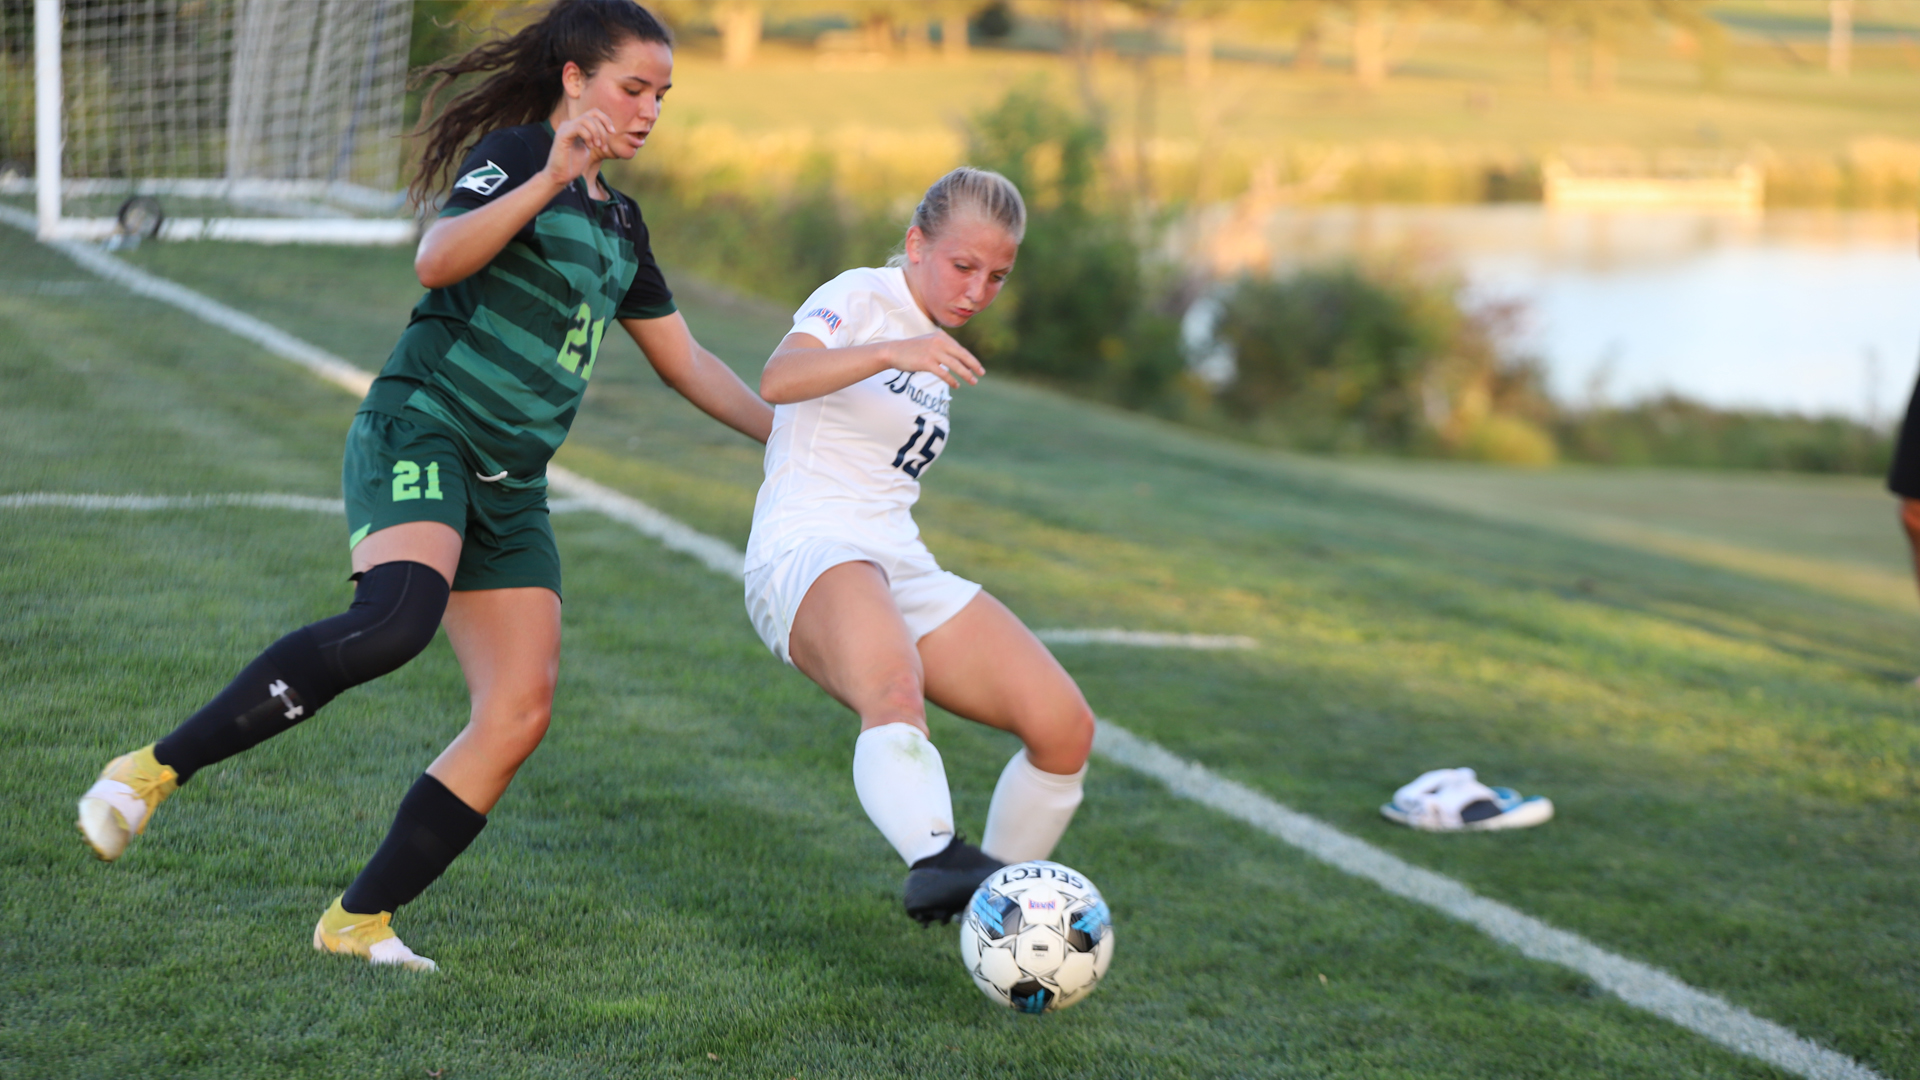 Women’s Soccer was Defeated by No. 7 Central Methodist